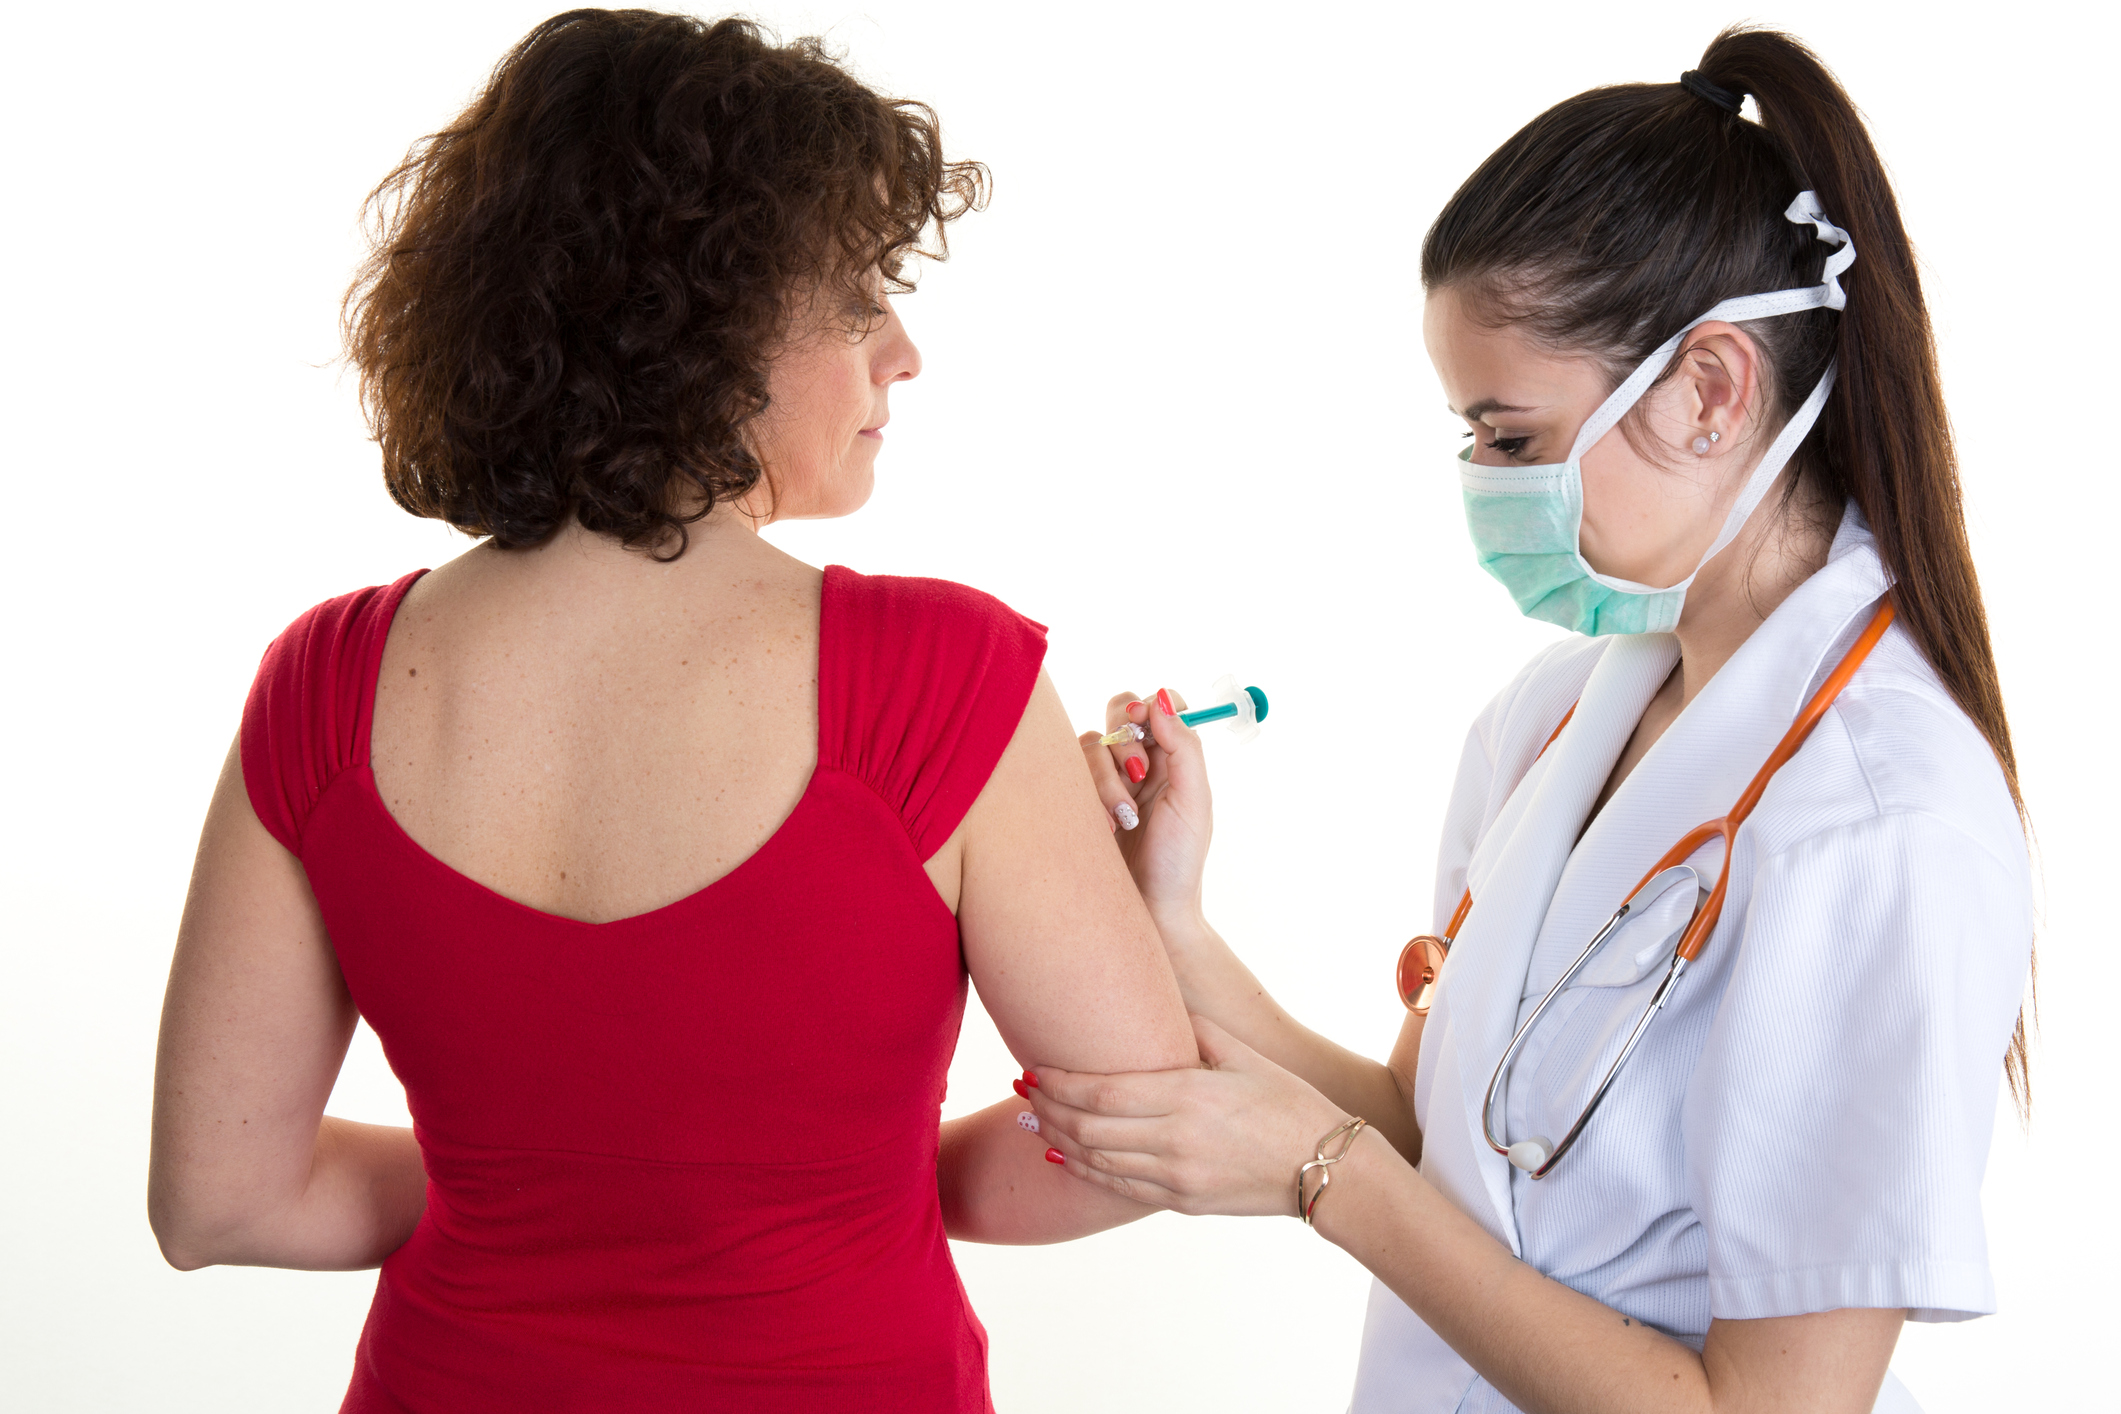 Influenza vaccination is safe and effective for fibromyalgia patients